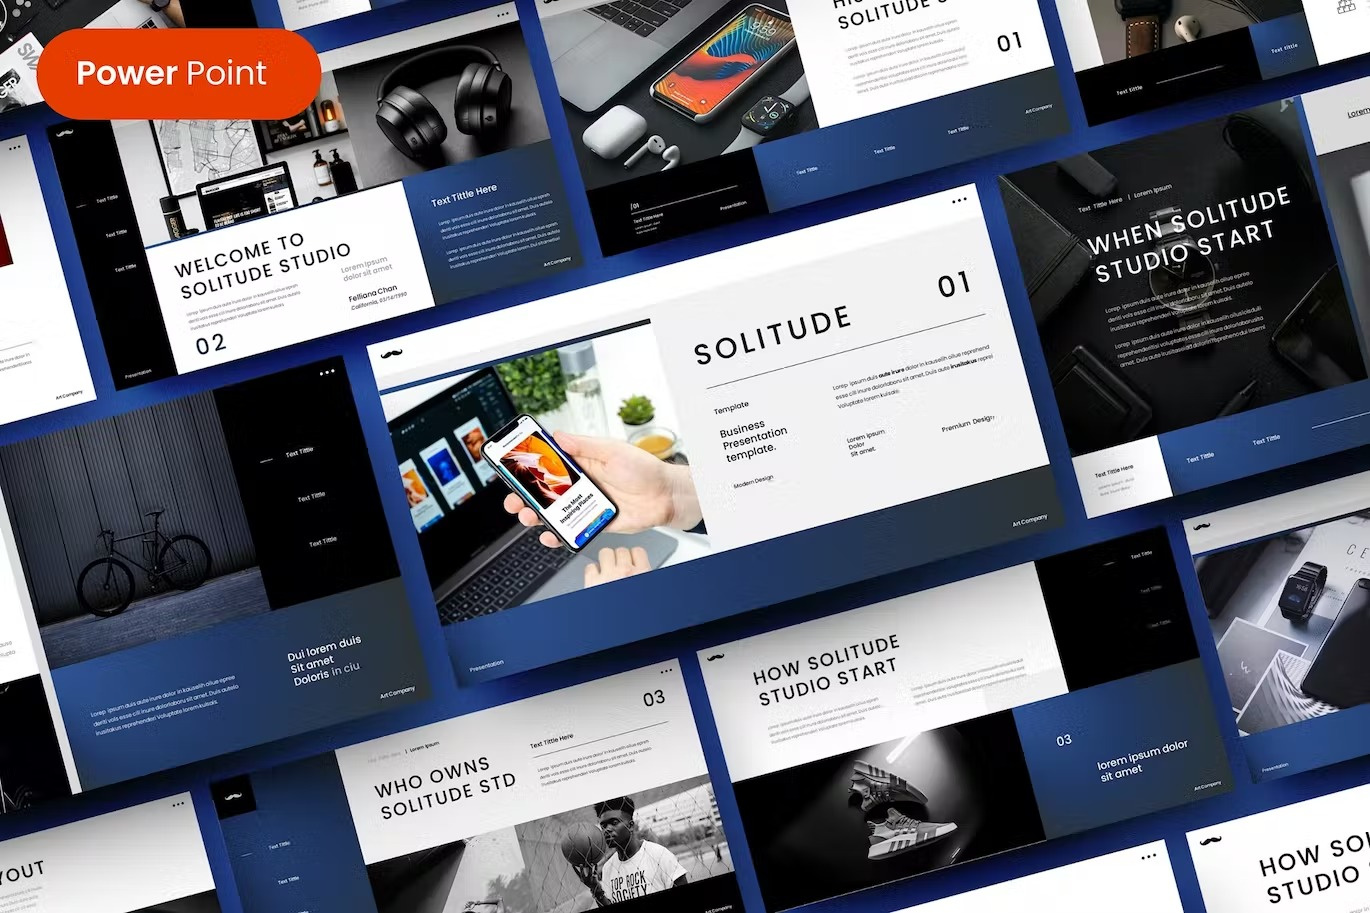 Solitude – Business PowerPoint Template by MyTemplates on Dribbble